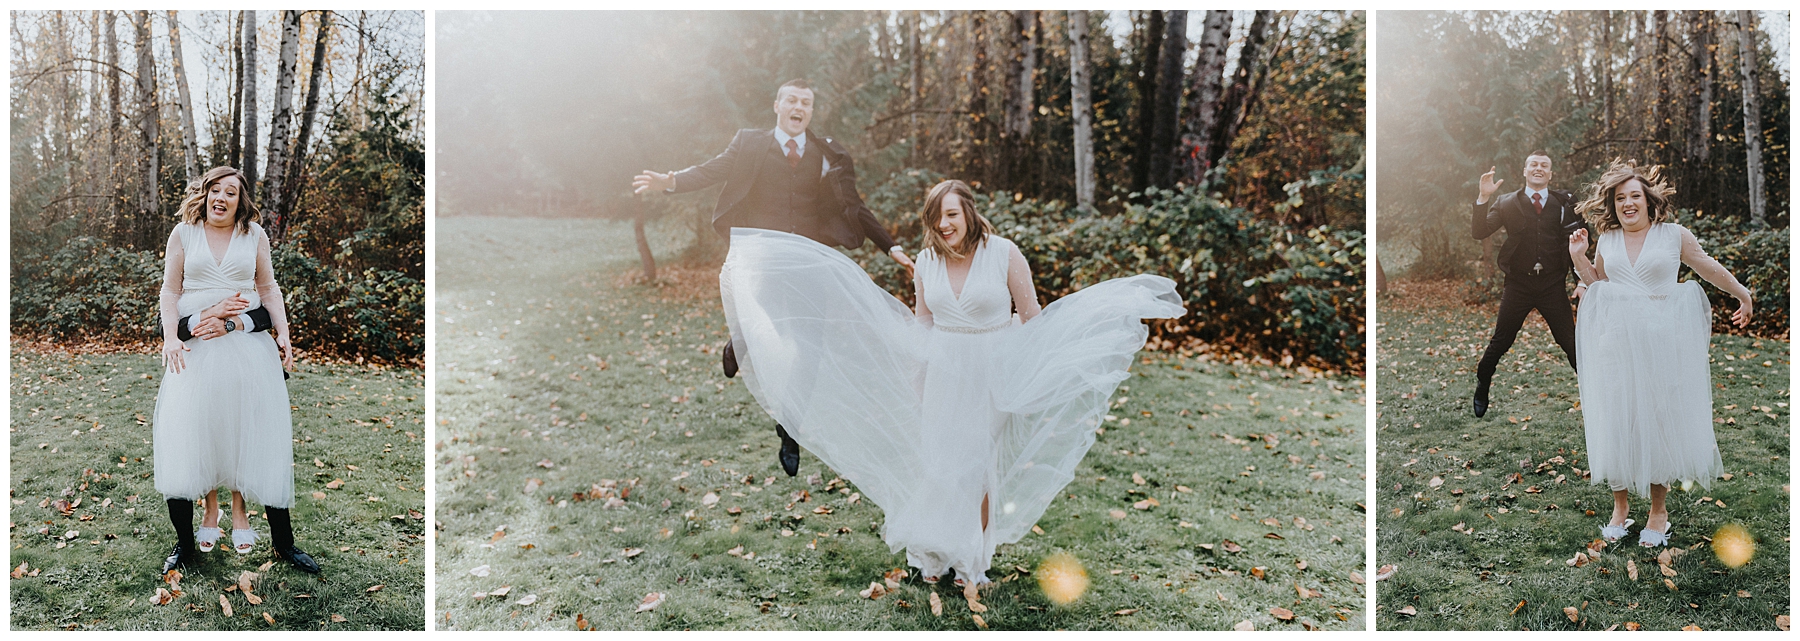 Issaquah Wedding Venues, Confluence Park, Confluence Park Elopement, Image result for Issaquah Elopement, Seattle Elopement Photographer, Issaquah Elopement, An Intimate Pacific Northwest Elopement, Lauren Ryan Photography, Seattle Wedding Photographer, Seattle Elopement Photographer,seattle elopement